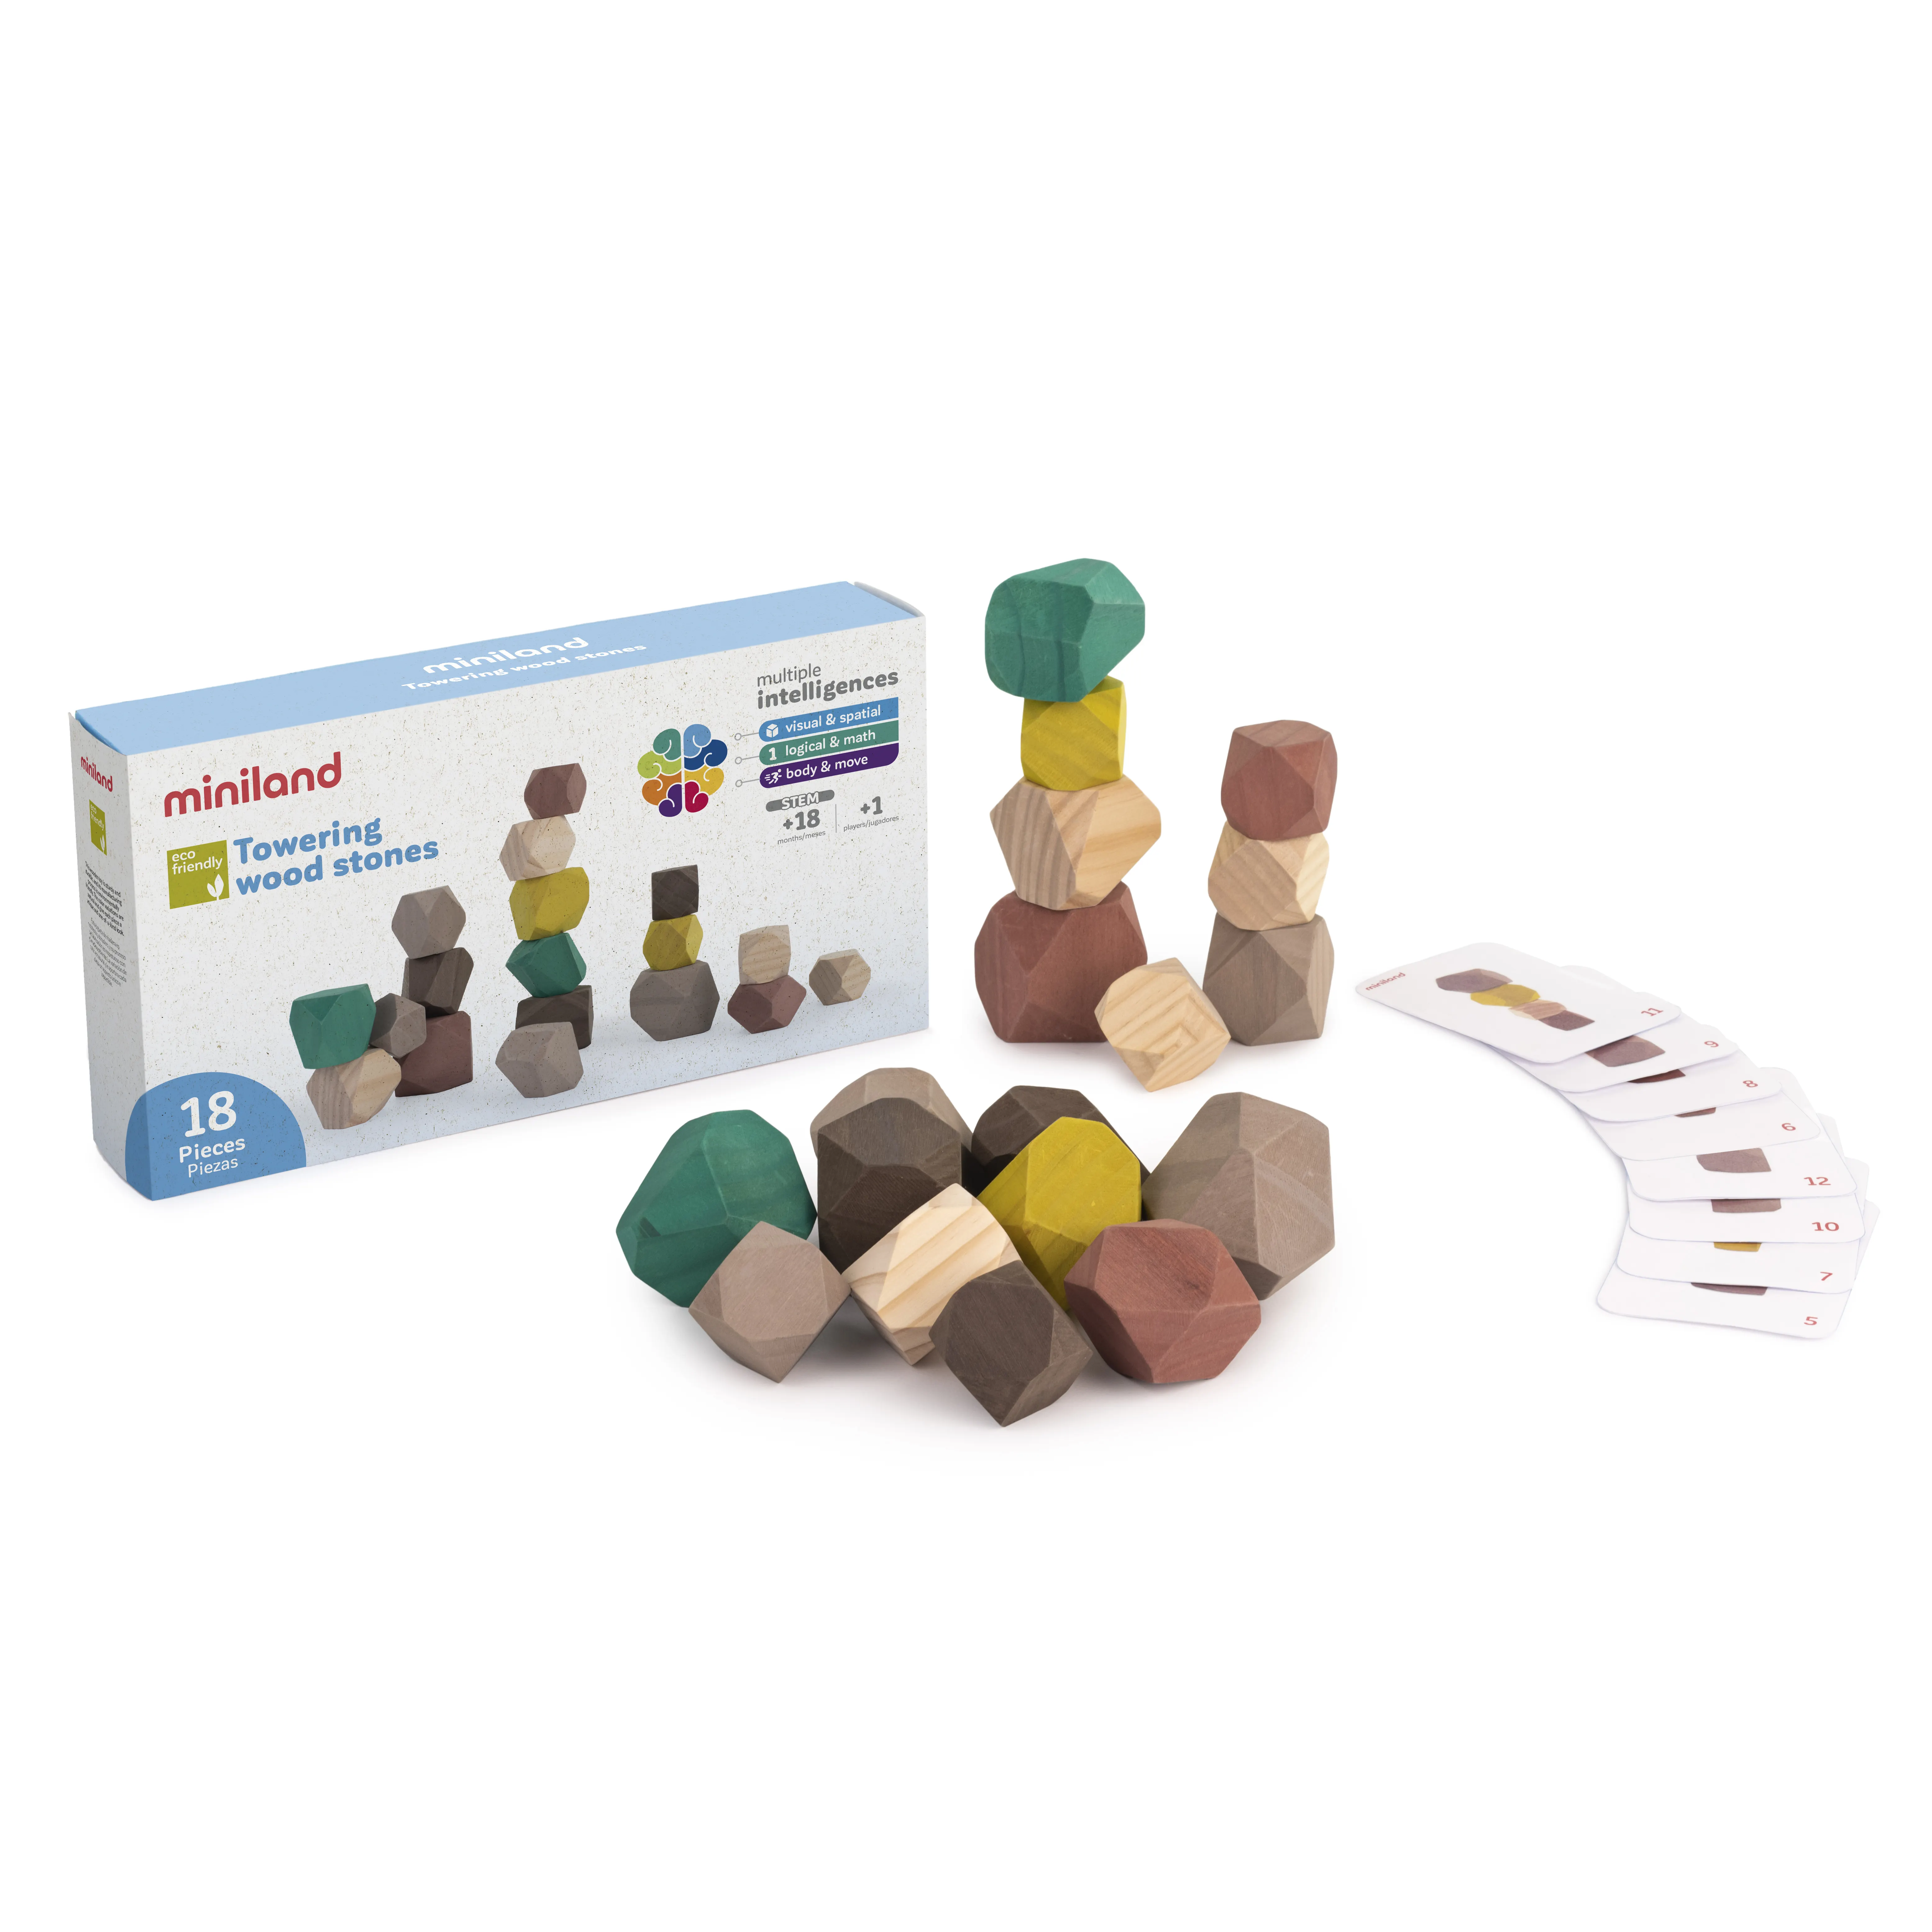 Miniland Towering wood stones (18 pcs) 5,5 cm Spanish high quality toy for child's coordination skills development